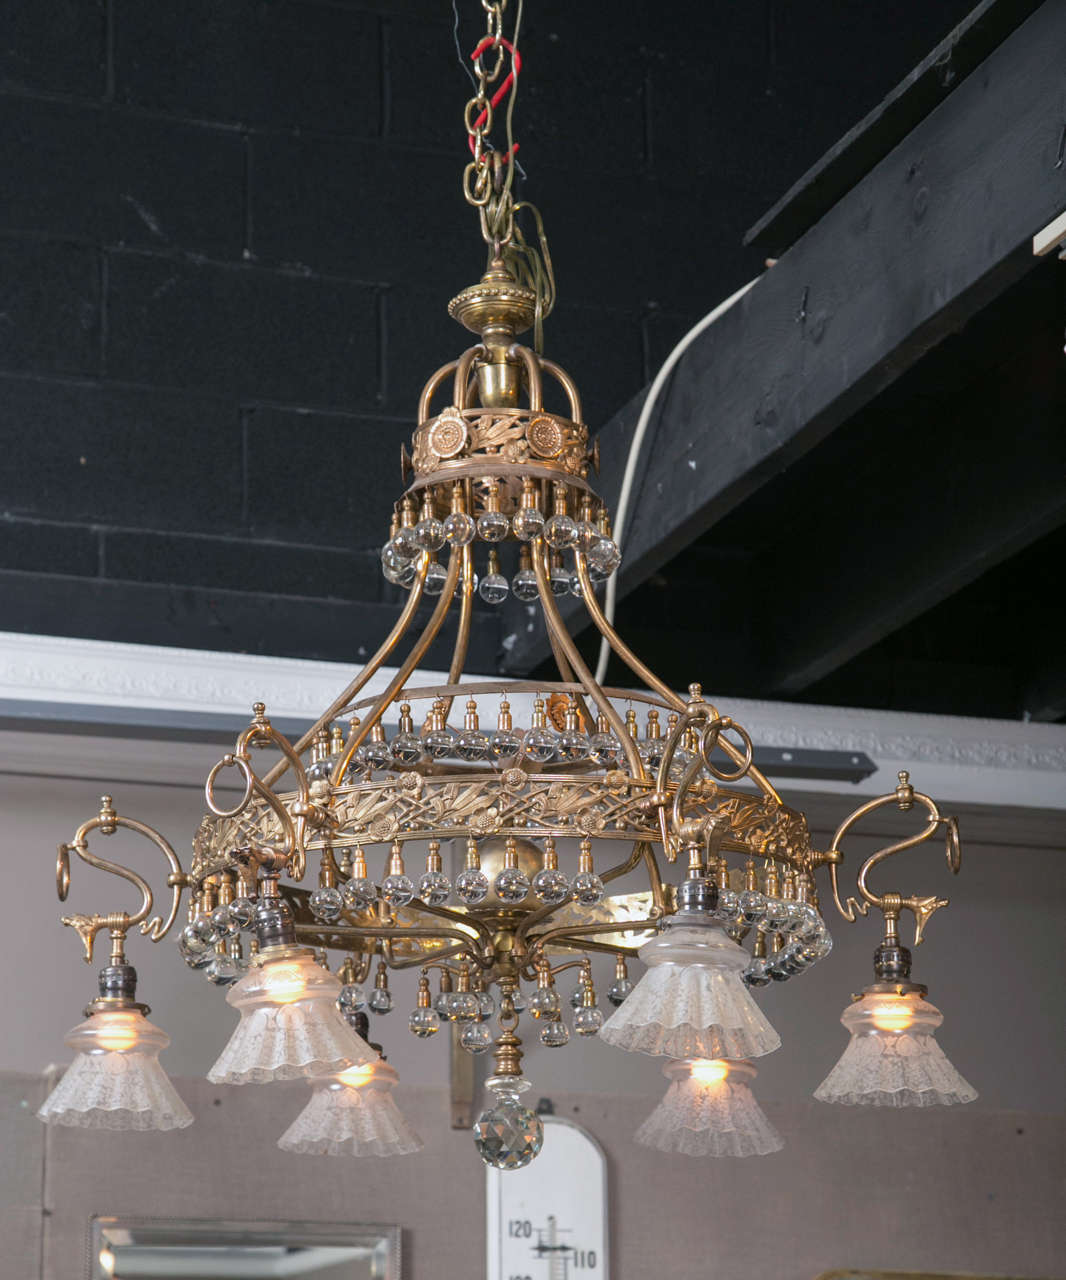 1880's Electrical Chandelier this fixture (gas) can be seen in the book 